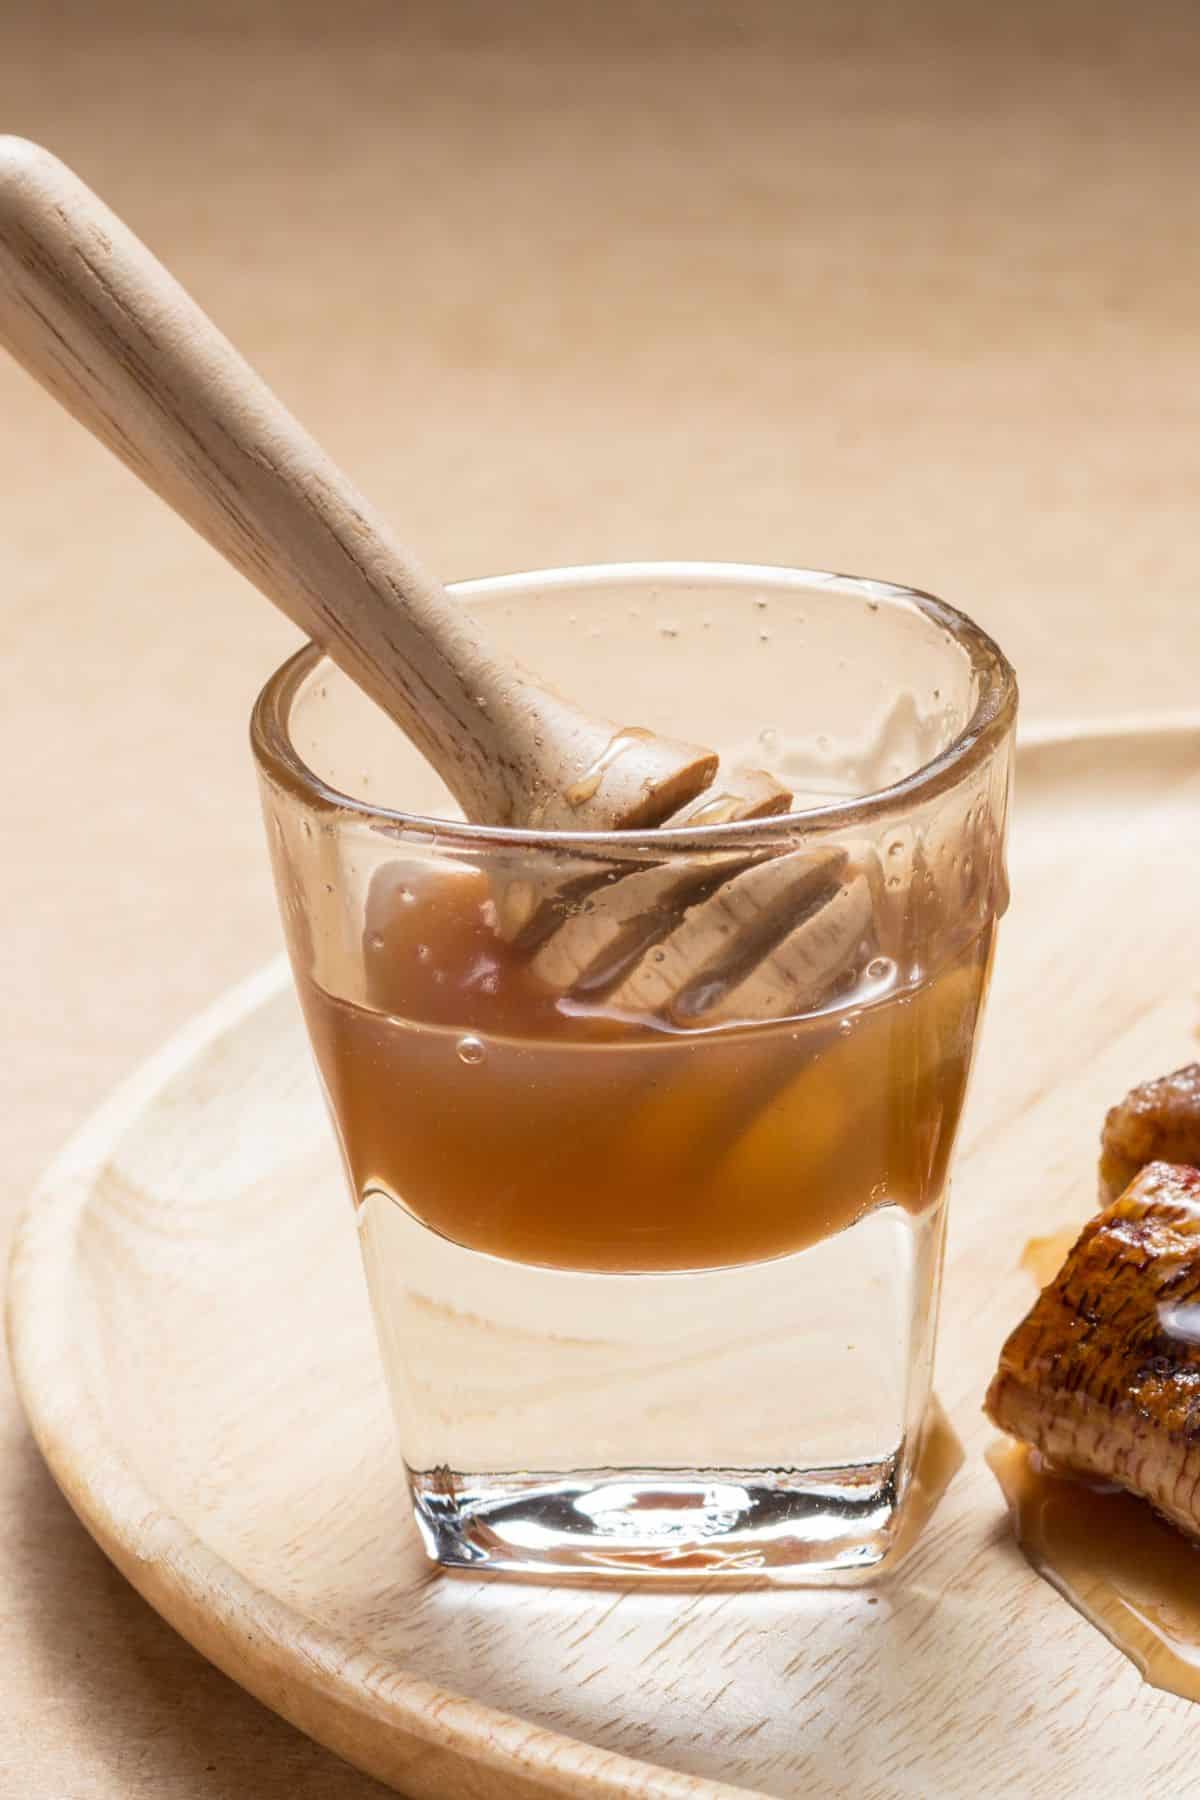 Clear glass container with coconut nectar on wooden surface.